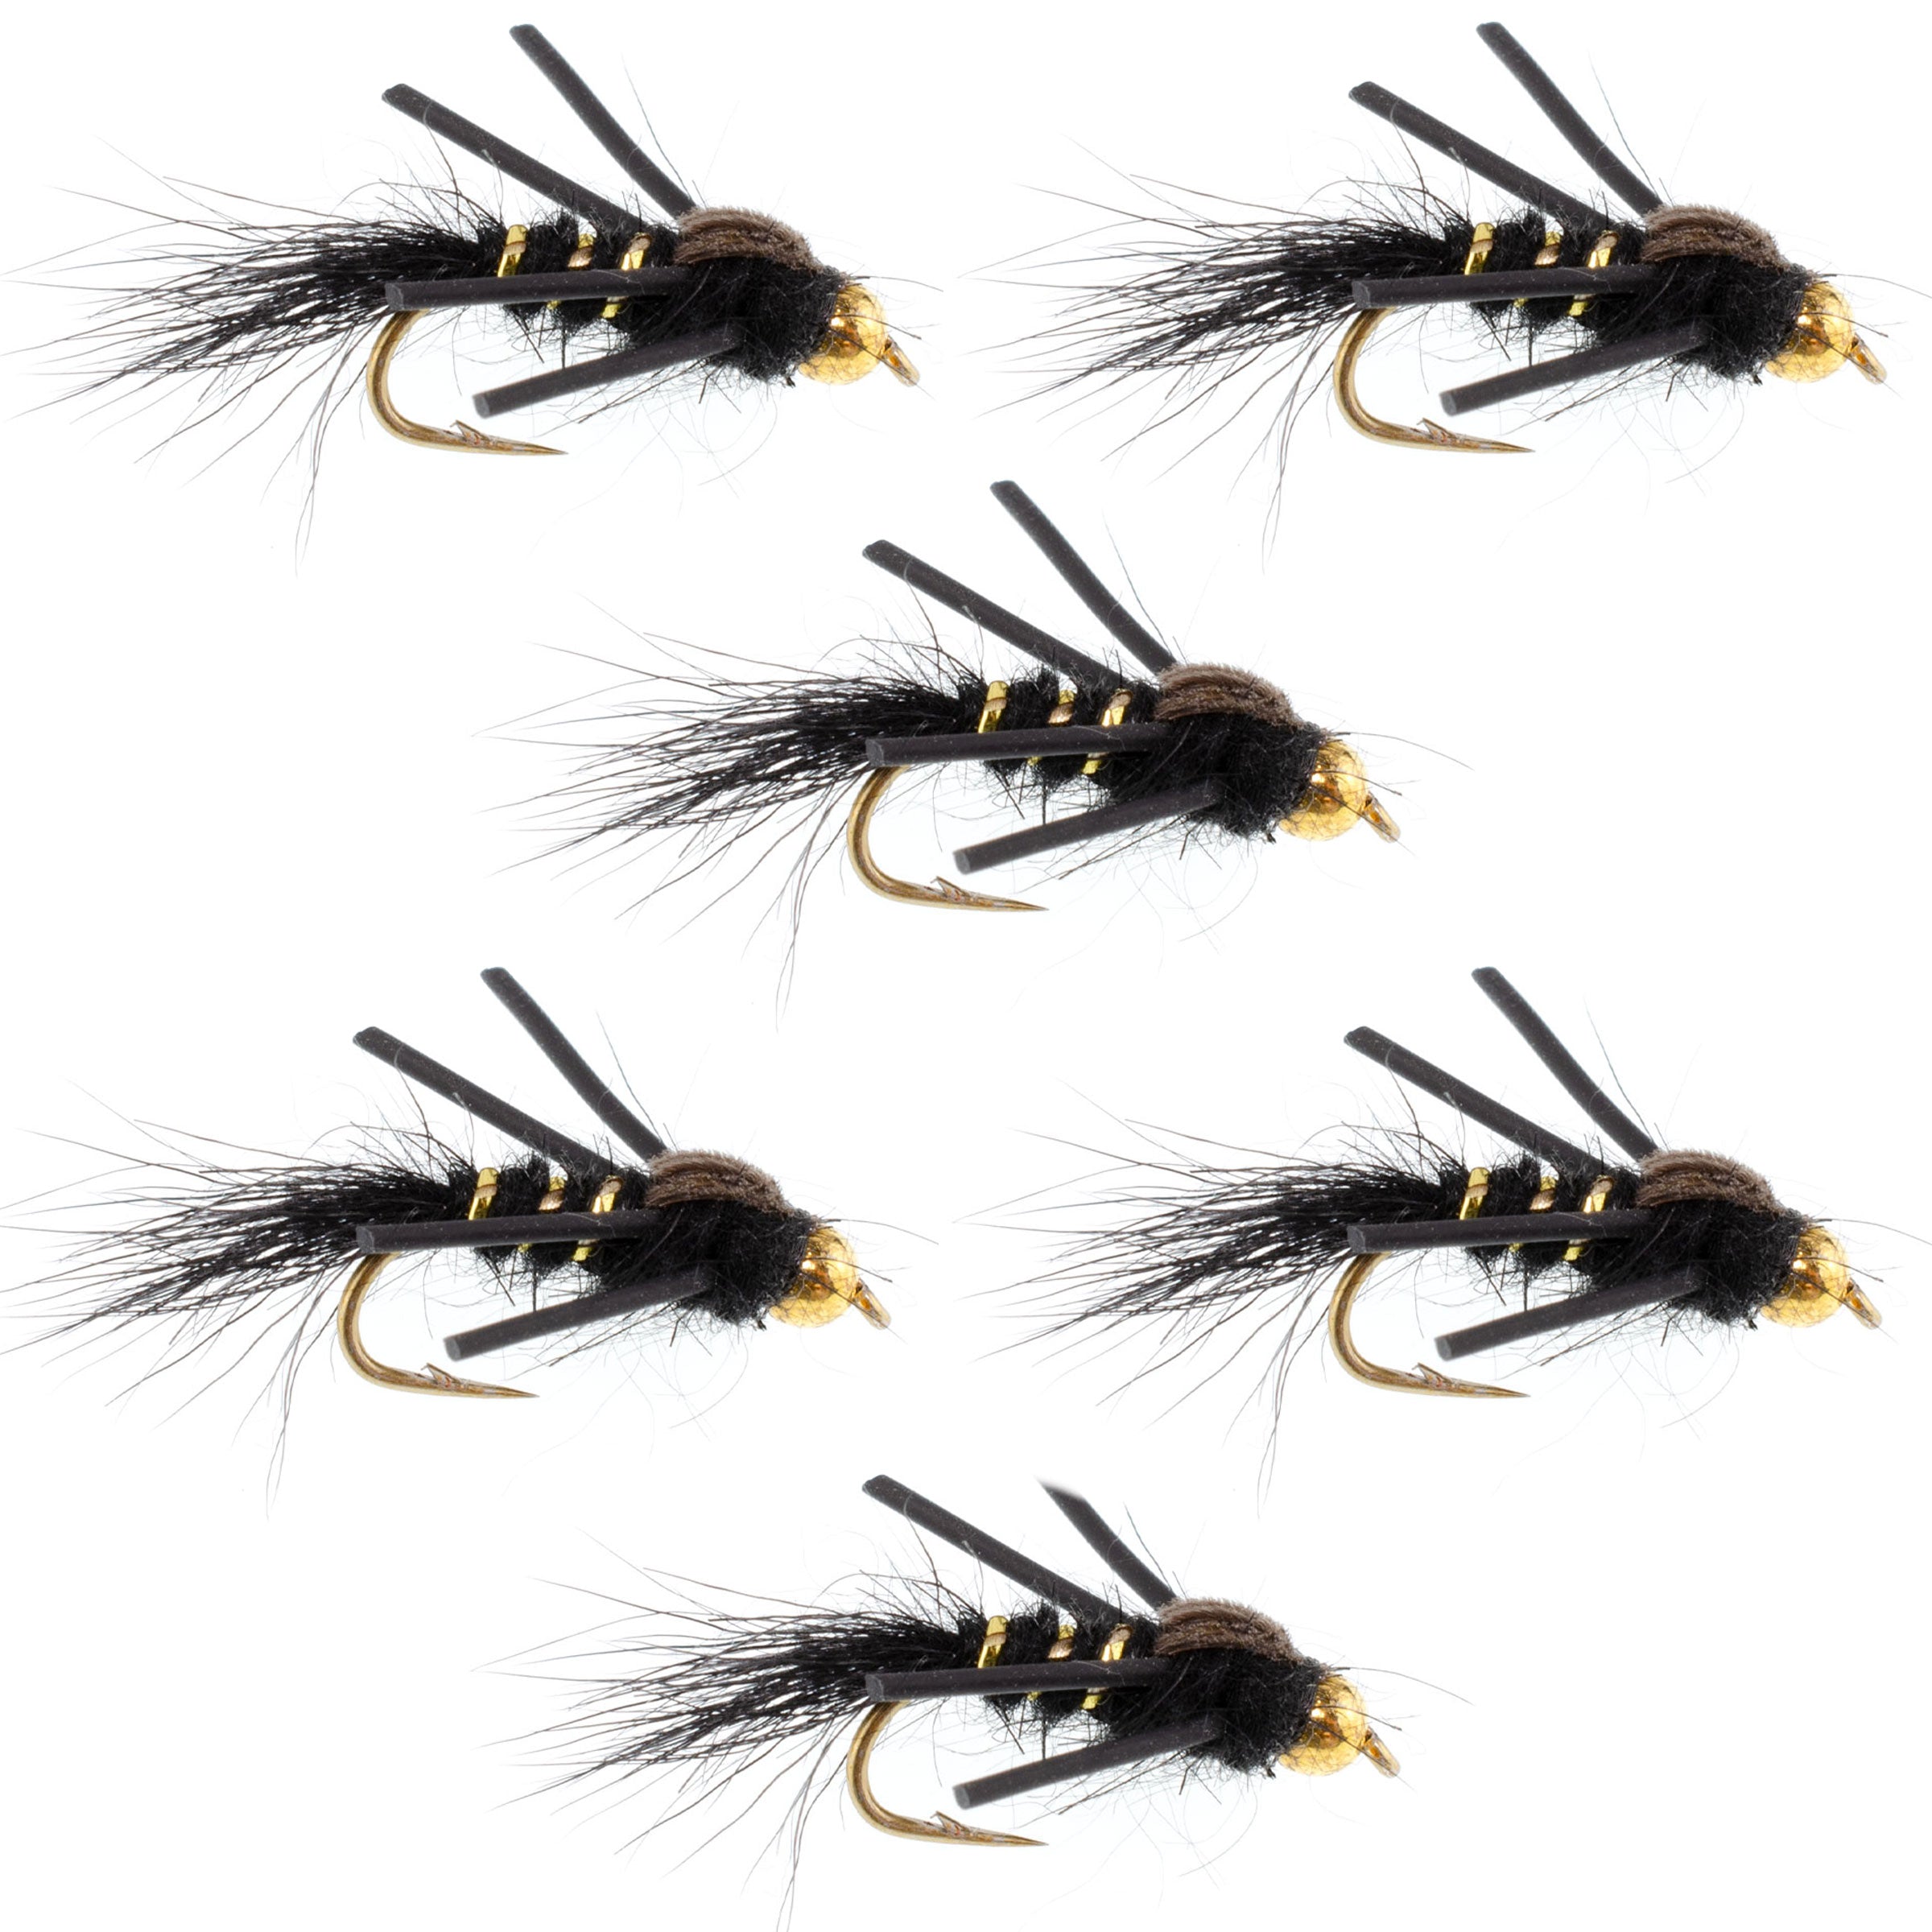 Tungsten Bead Head Rubber Legs Black Gold-Ribbed Hare's Ear Trout Fly Nymph - 6 Flies Hook Size 14